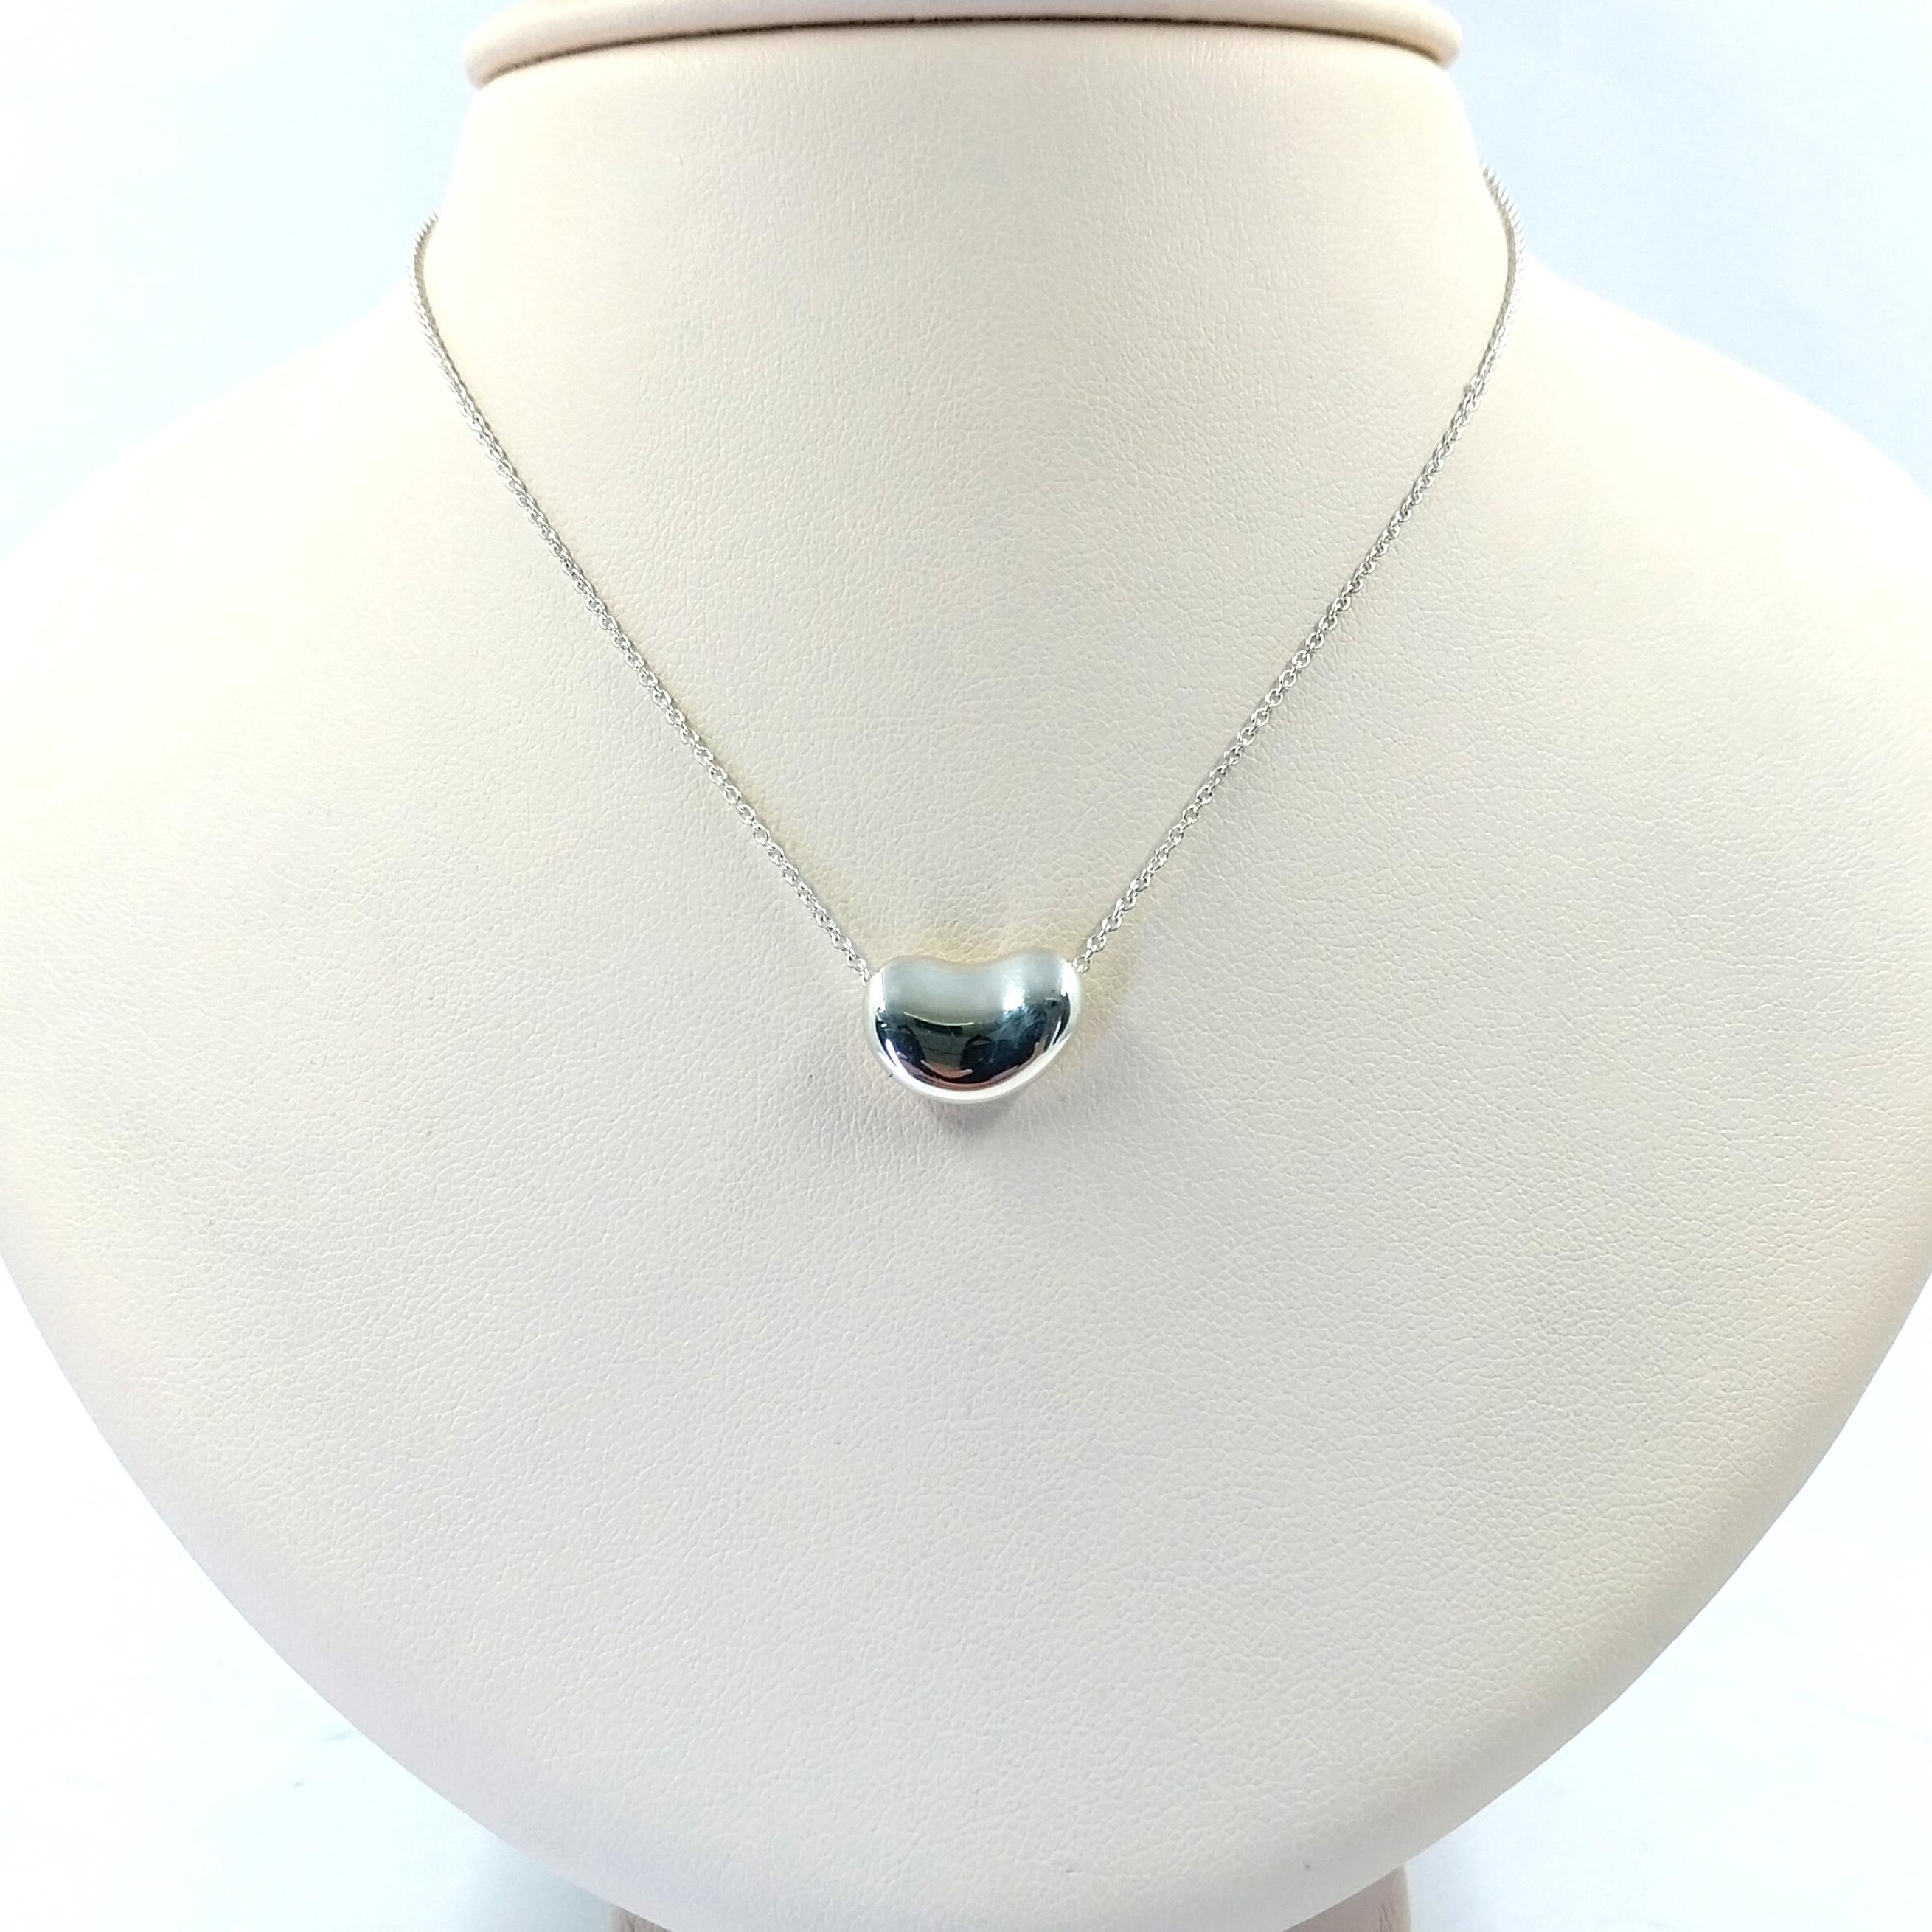 Tiffany and Co Elsa Peretti Sterling Silver 9mm Bean Design Necklace. 16 Inches Long. $275 MSRP.